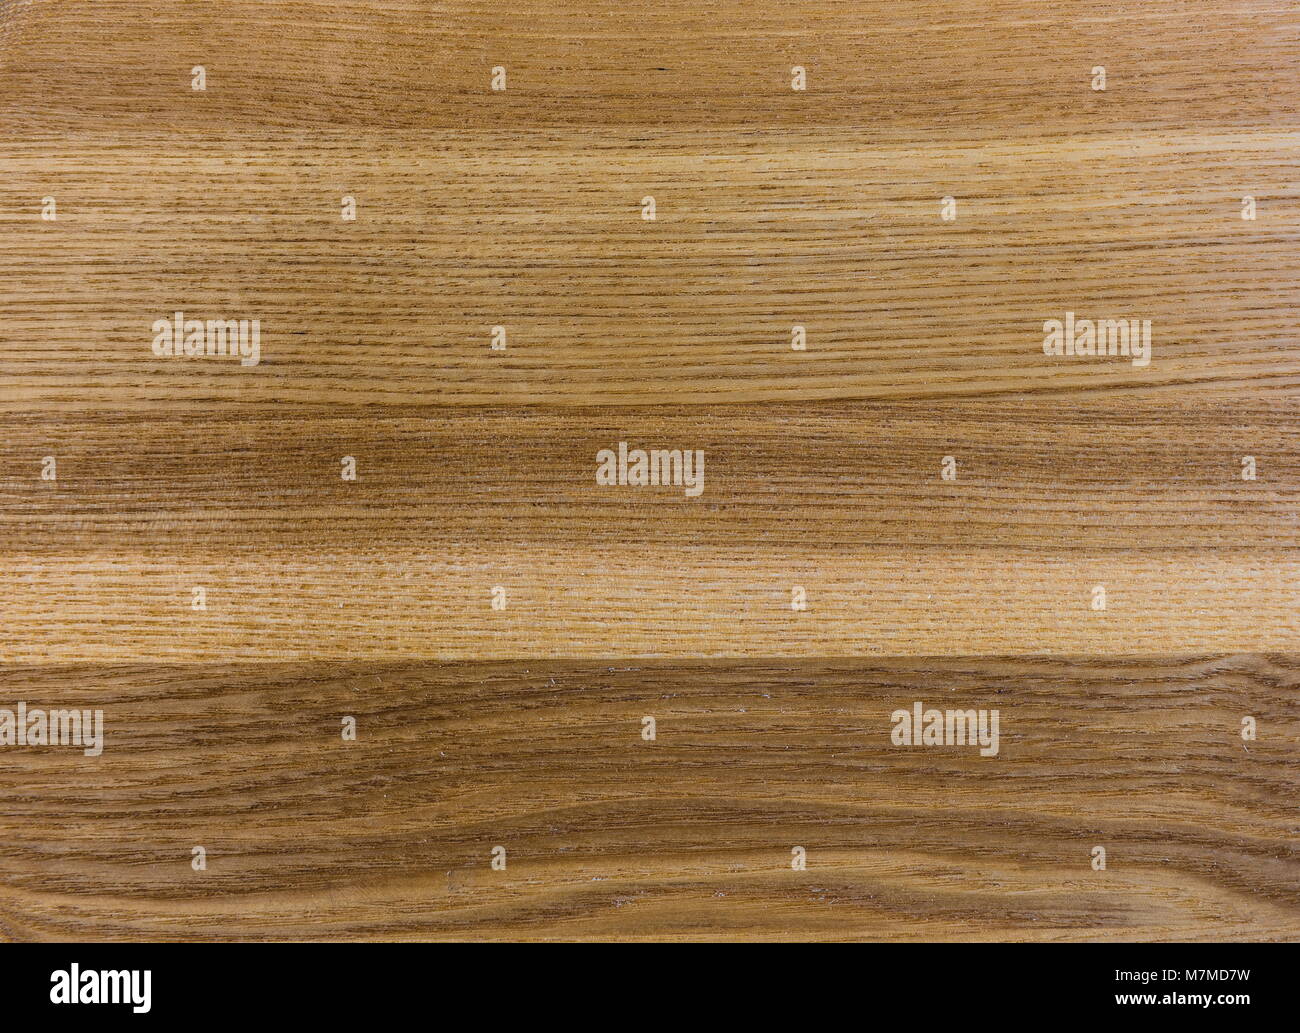 The texture of the wood. Flooring. Oak, Ash and Elm trees Stock Photo